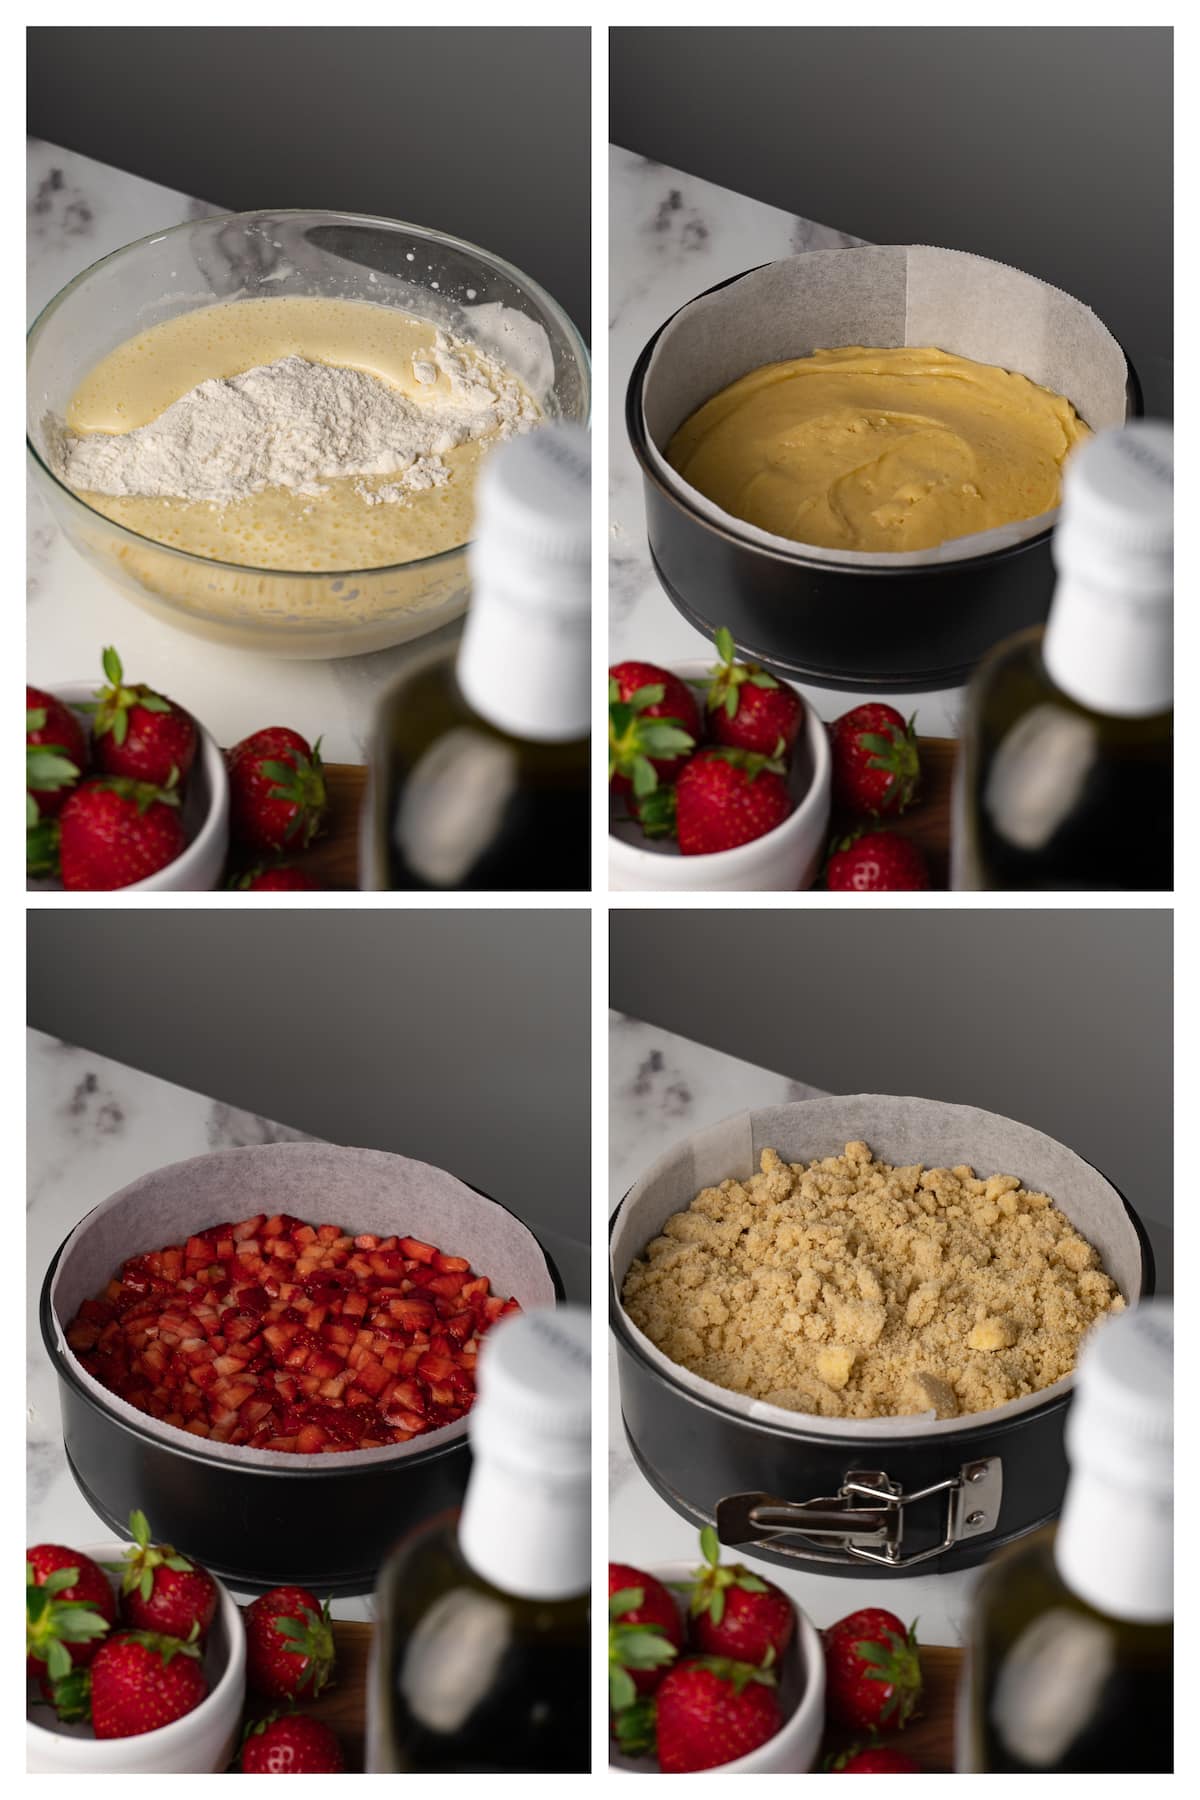 The collage image shows four steps to assemble and bake strawberry crumble cake.